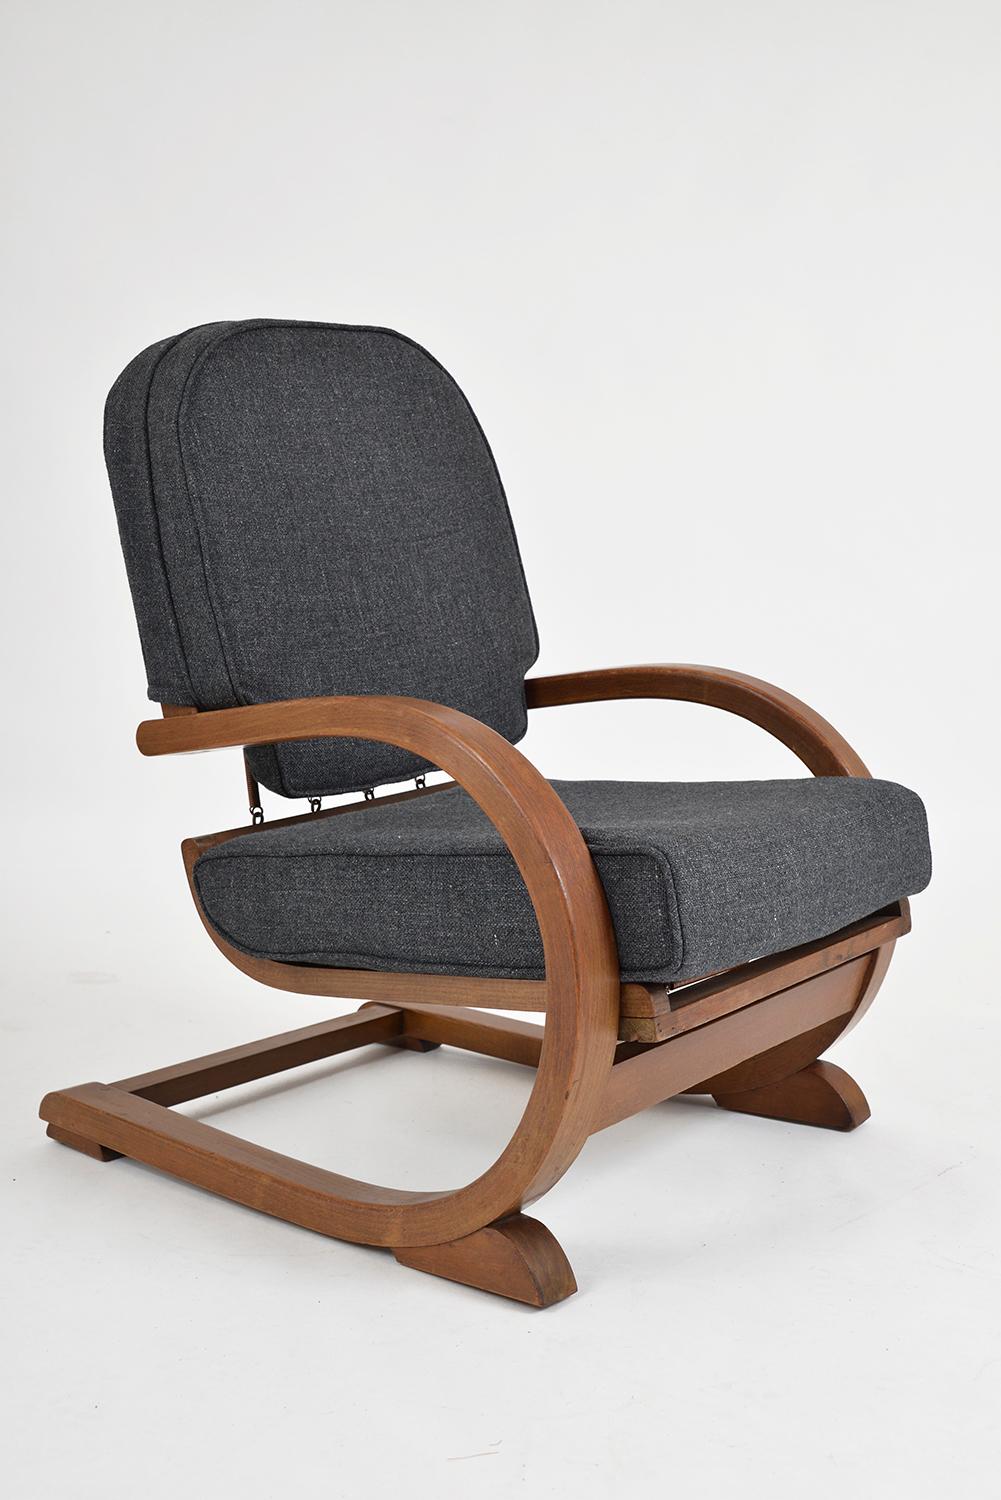 This rare 1930s Modernist armchair known as the ‘Famulus’ was designed by J. P. Hully and made by P.E Gane Ltd in Bristol, UK.
The Famulus chair is made from steamed birch with the arms bending through 180 degrees ending on sledge feet. The wood